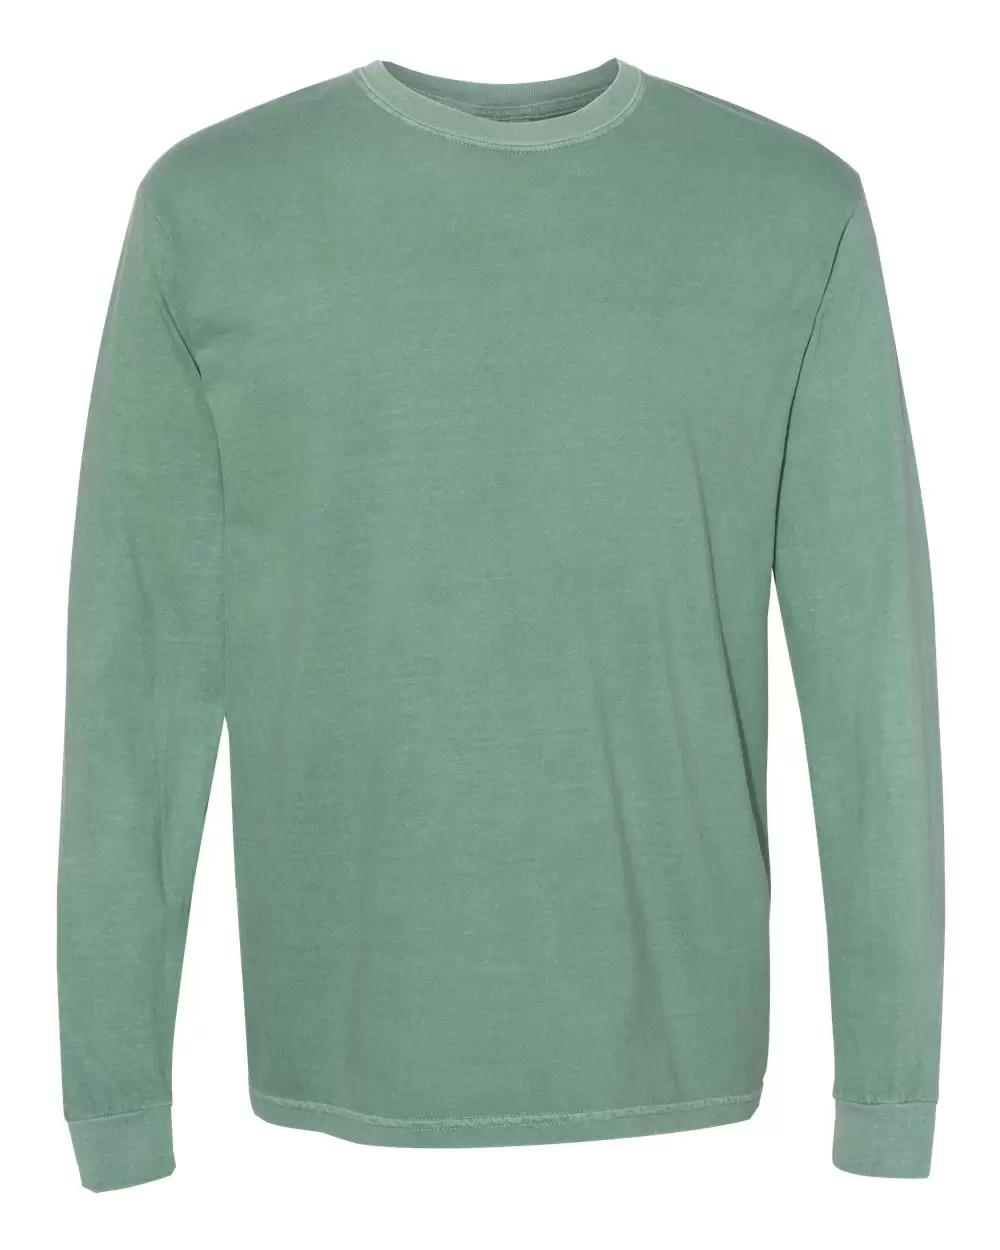 Comfort Colors 6014 6.1oz Long Sleeve T-Shirt - From $11.34